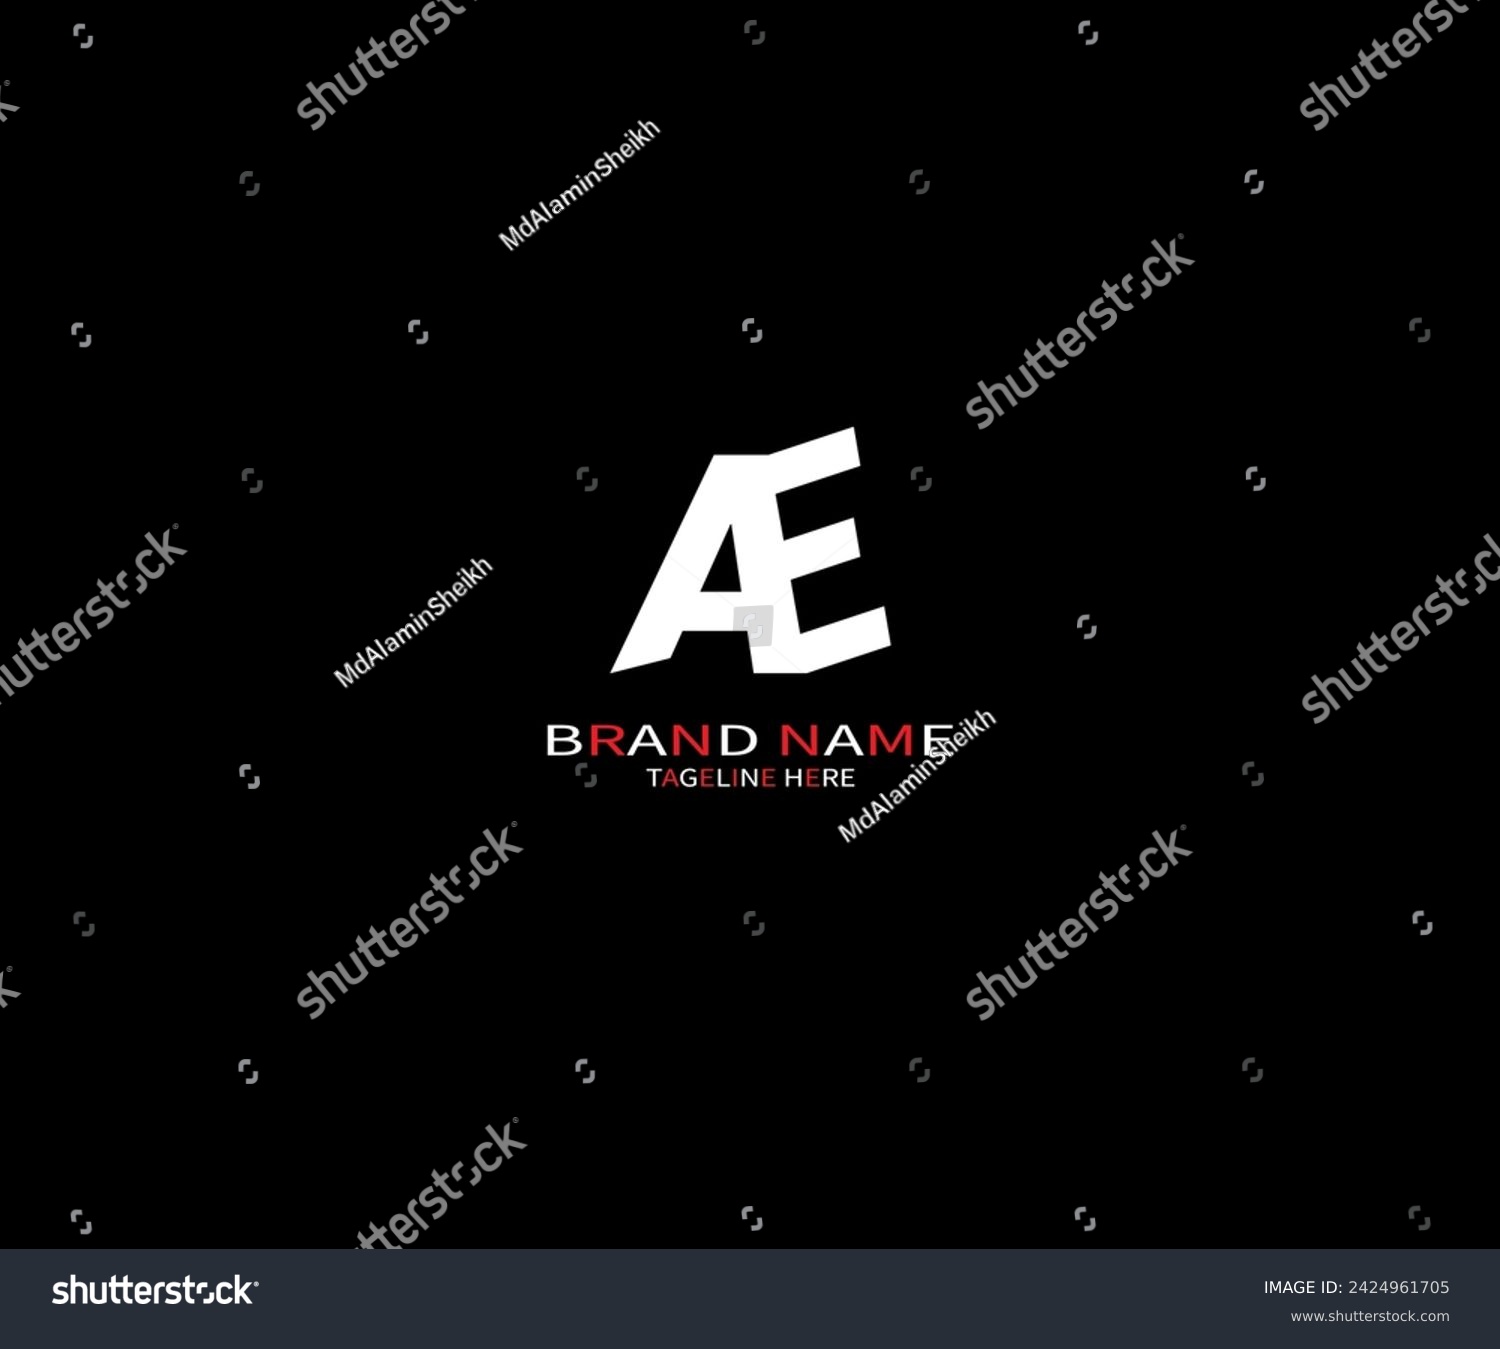 SVG of AE letter logo Design. Unique attractive creative modern initial AE initial based letter icon logo. svg